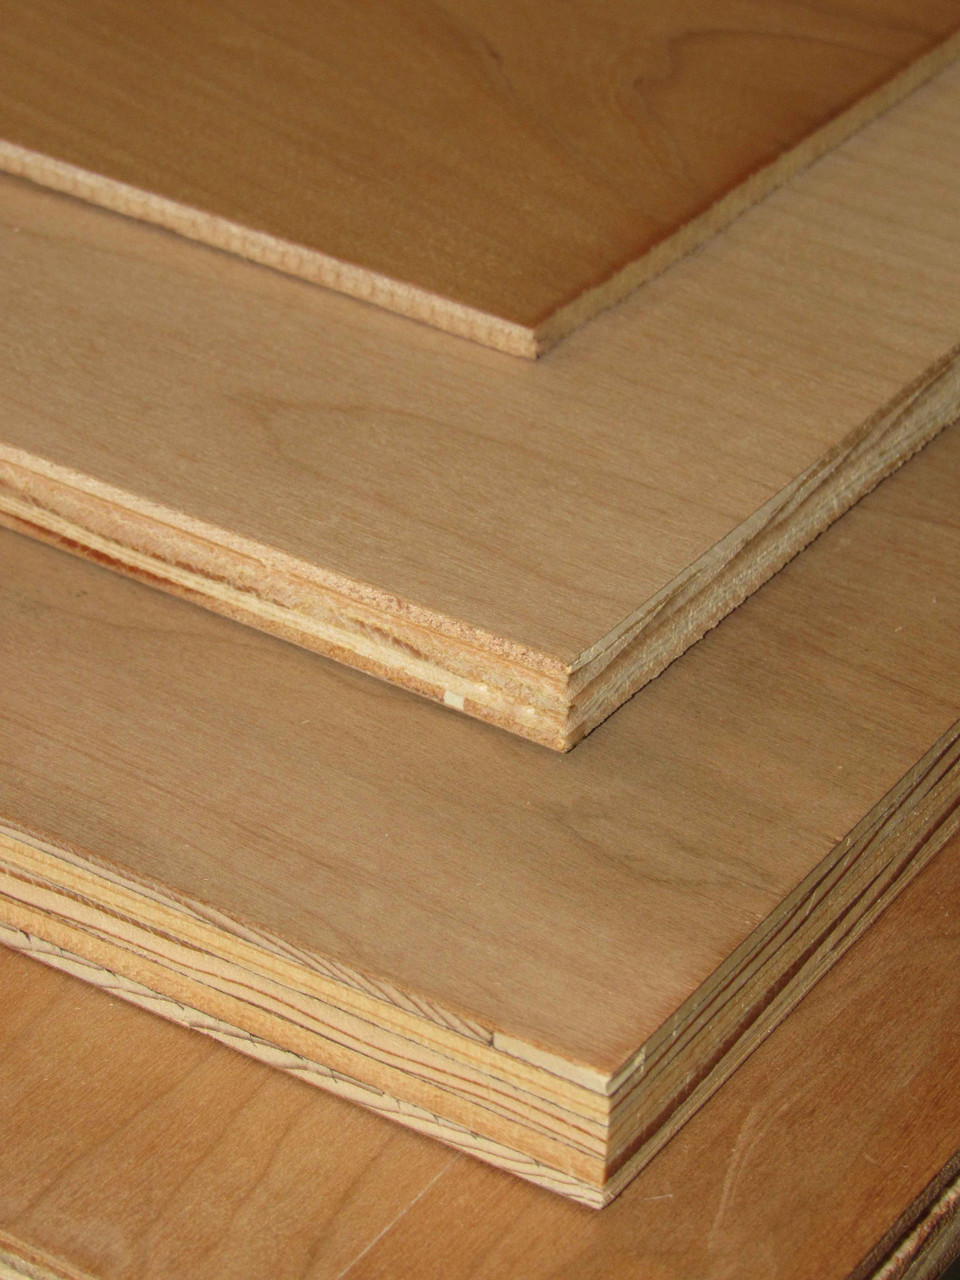 1/8 Veneer Core Plywood (A Face - #4 Back)